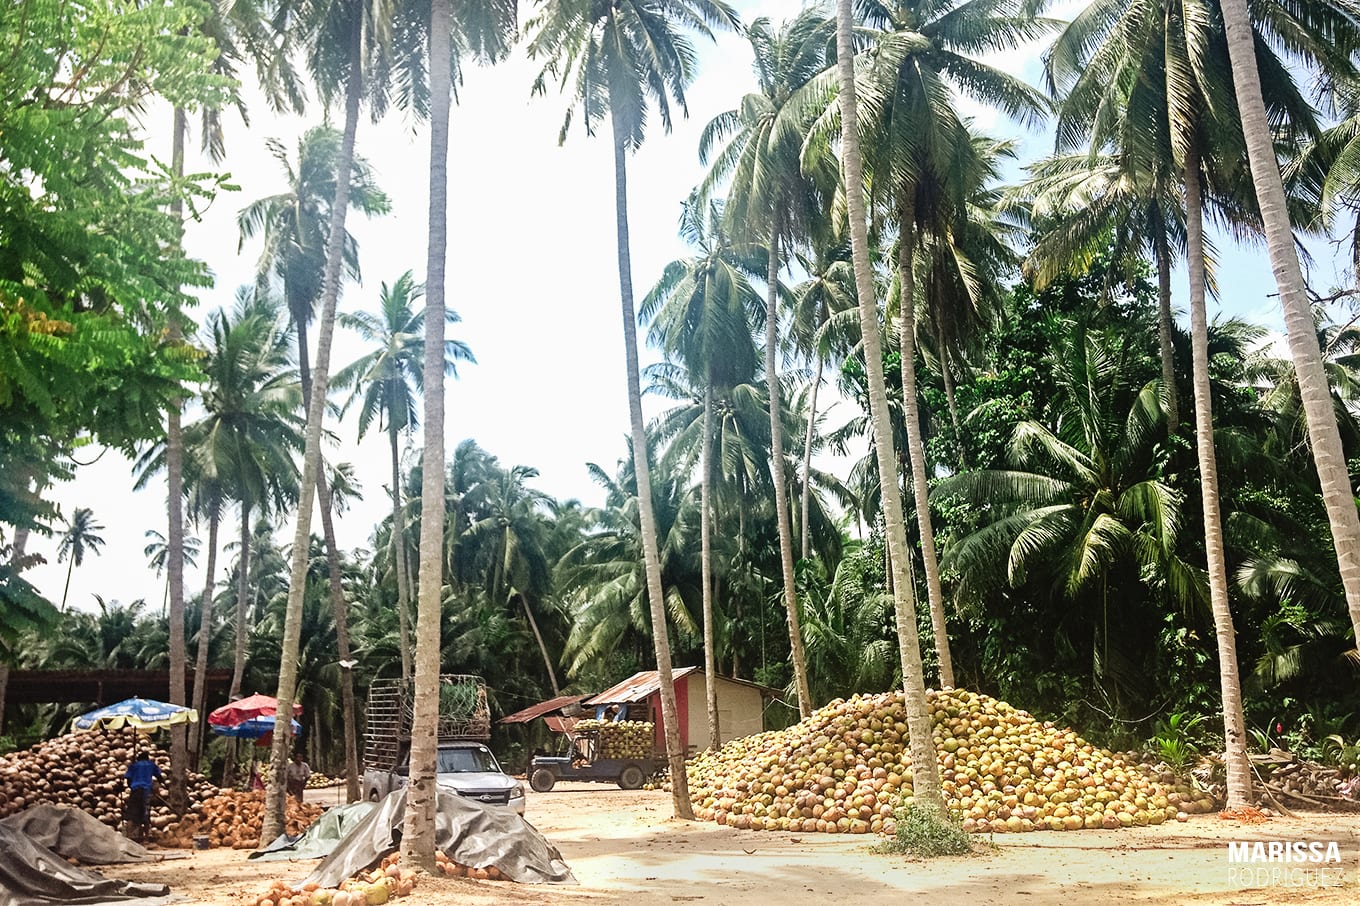 coconut trees_coconut palms_coconuts everywhere